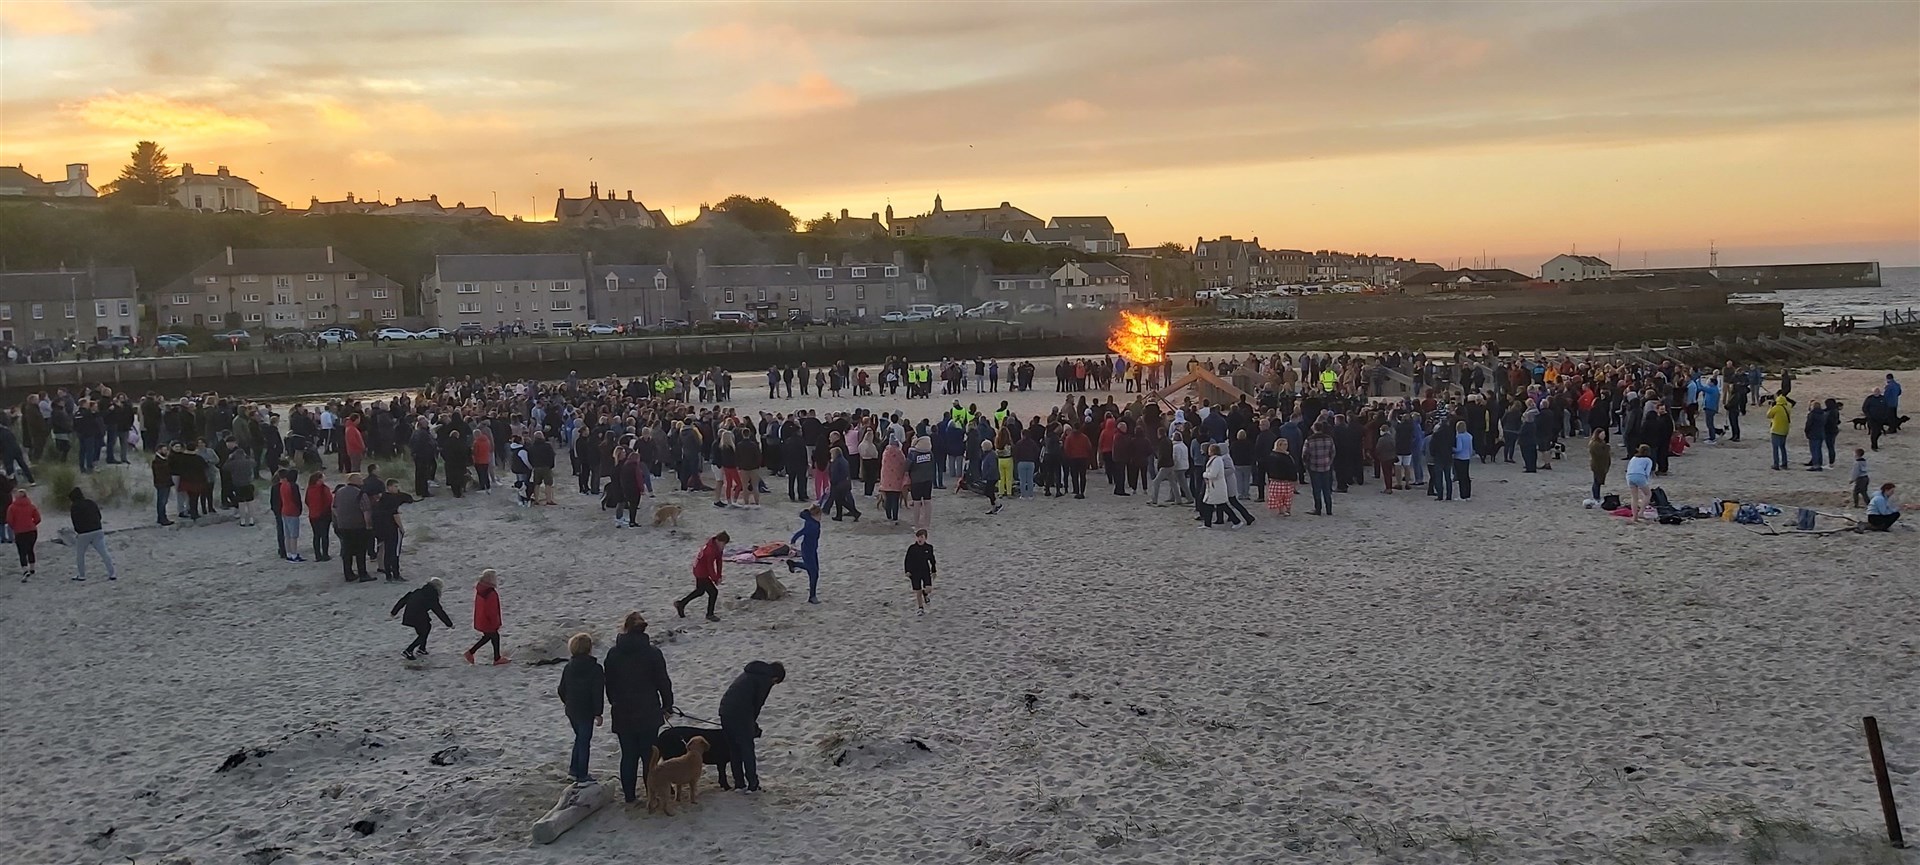 A large crowd flocked to the East Beach for the lighting of the beacon.